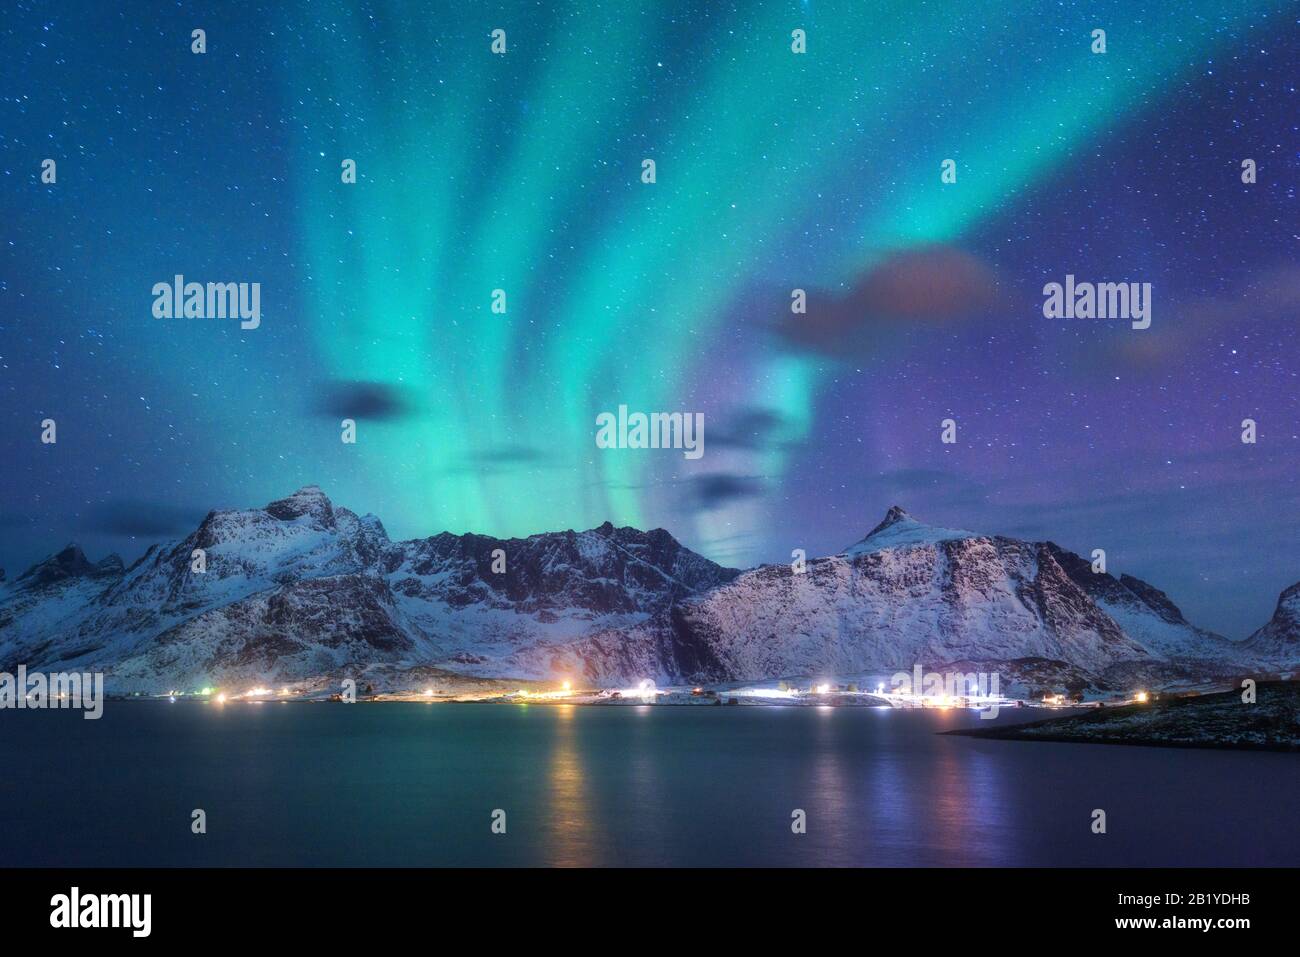 Aurora borealis over the sea, snowy mountains and city lights Stock Photo